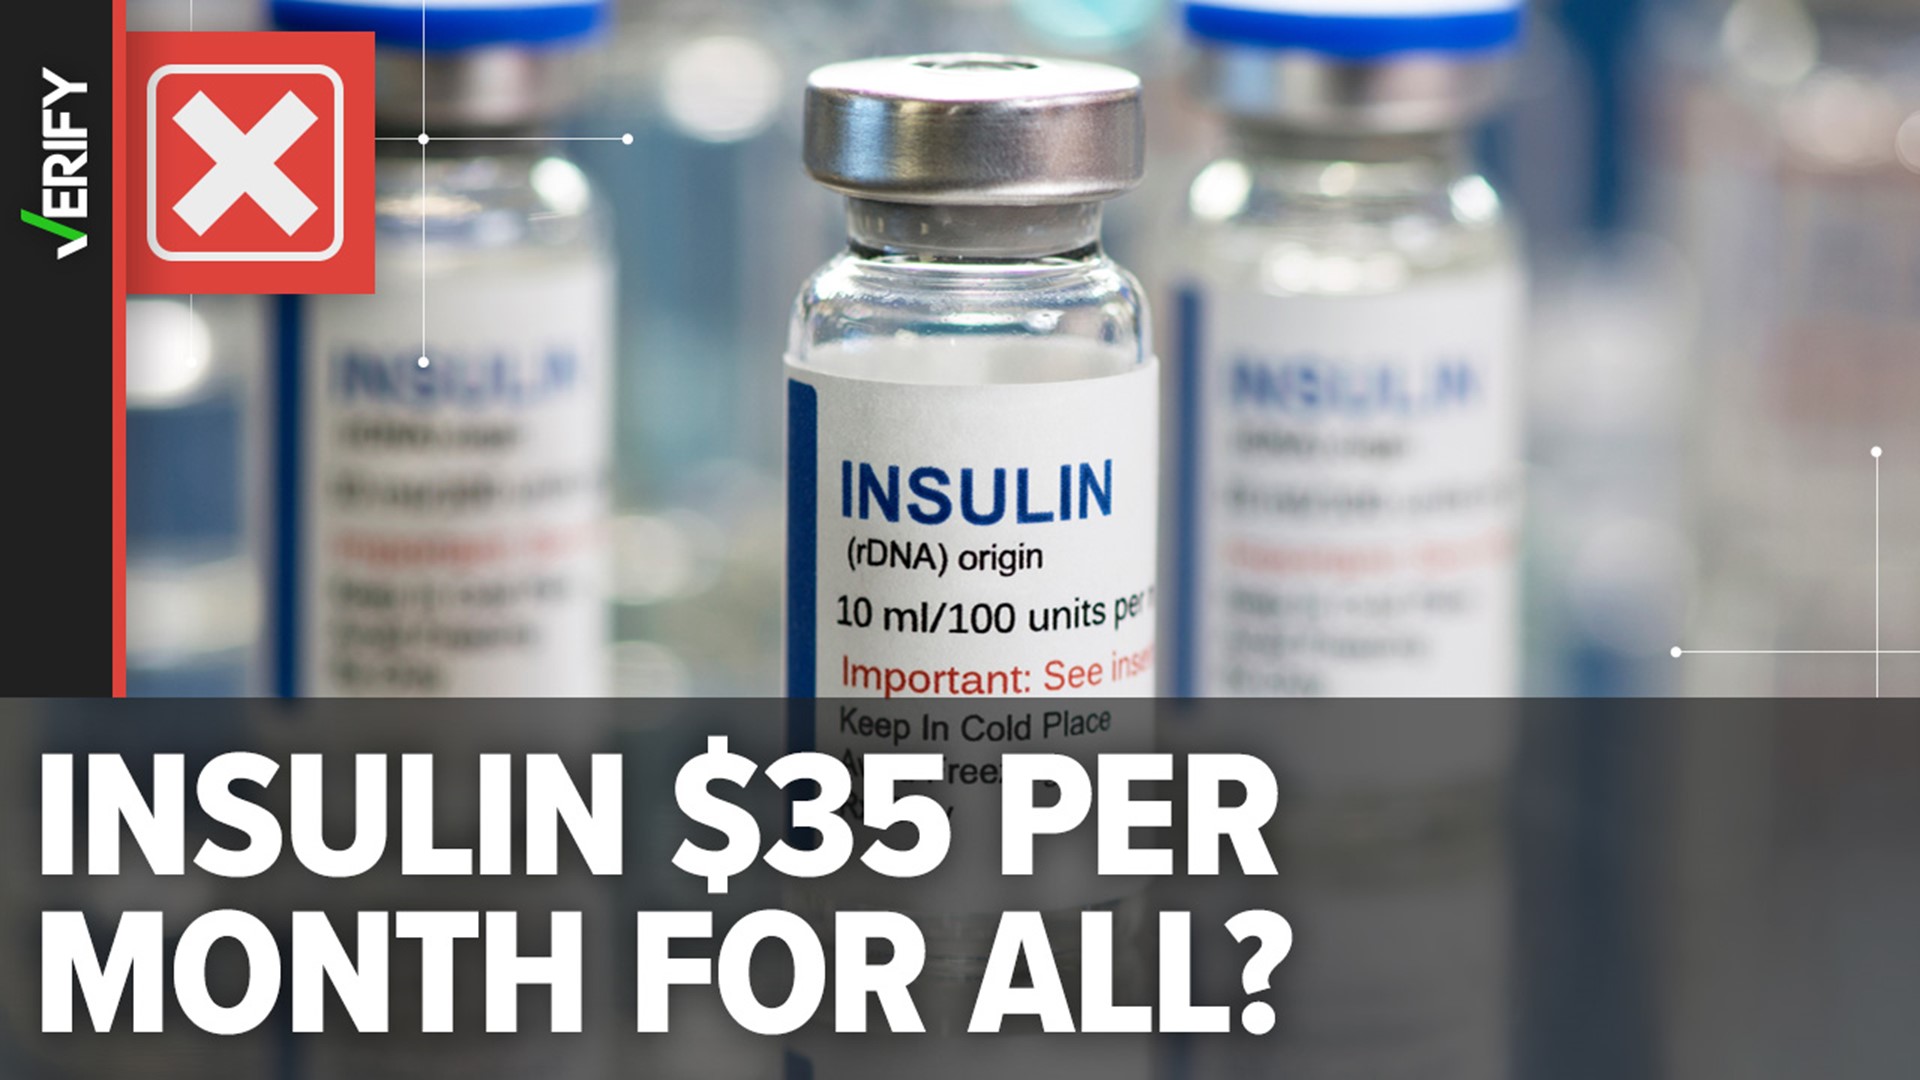 Eli Lilly, Novo Nordisk and Sanofi recently announced plans to cut prices of some of their insulins — but a $35 cap on the medication doesn’t apply to all.